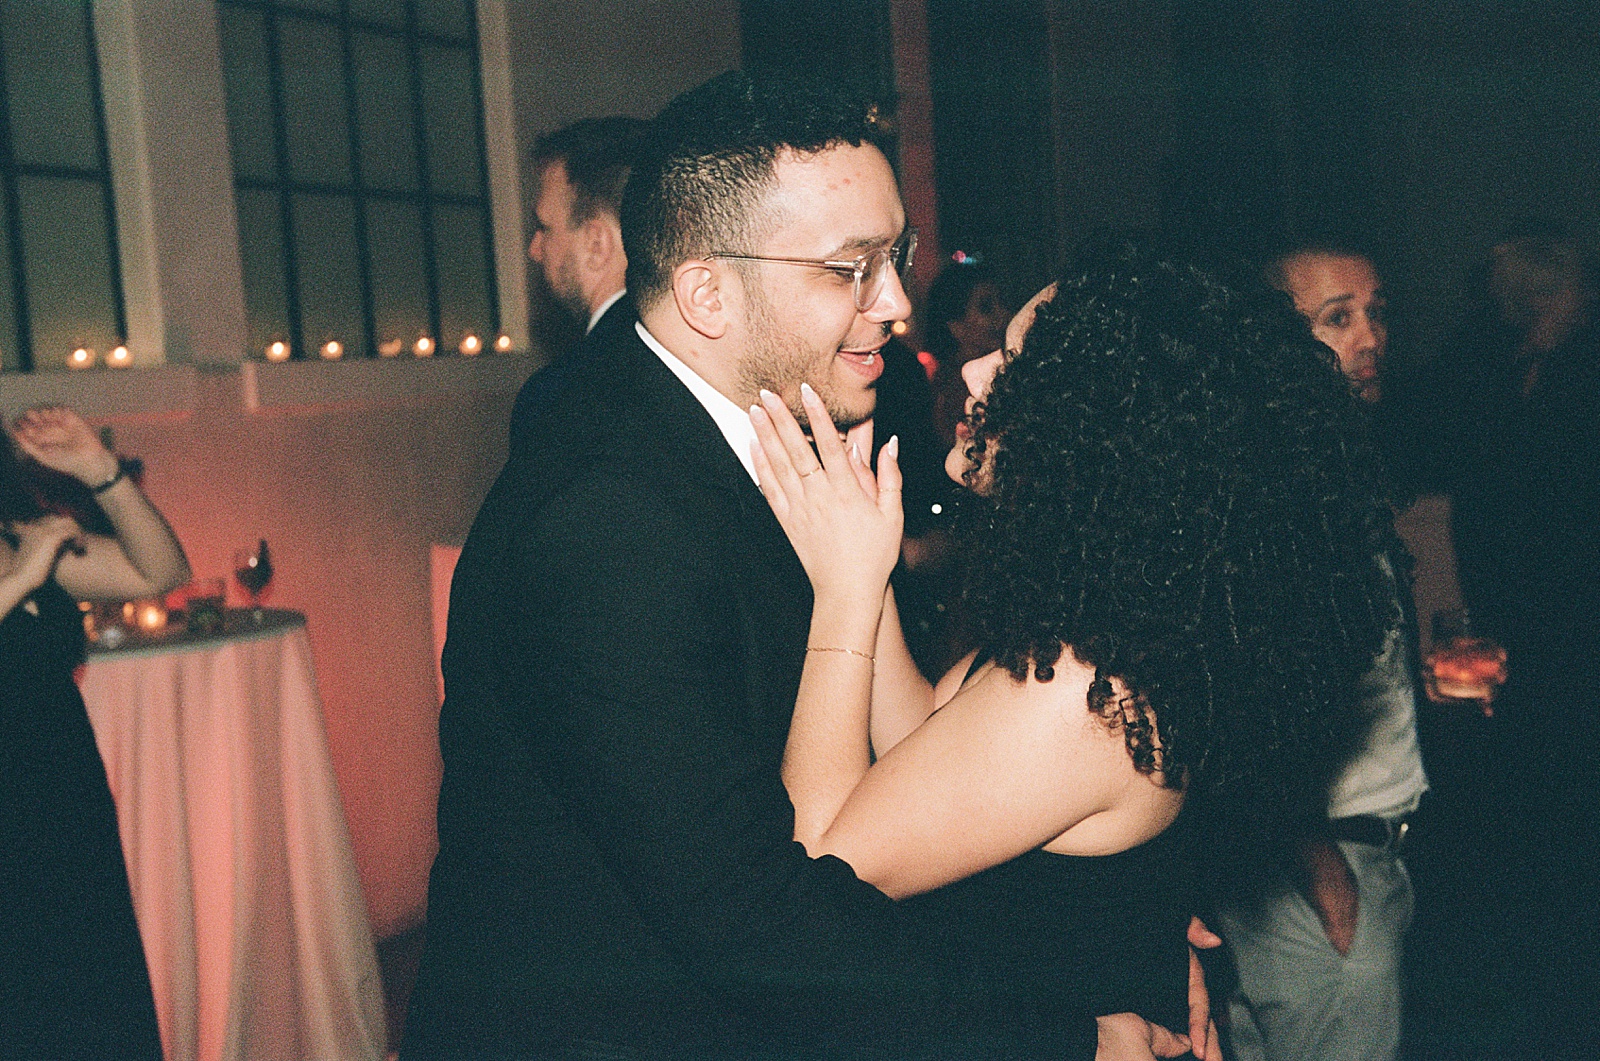 Two wedding guests dance closely in a film photo.